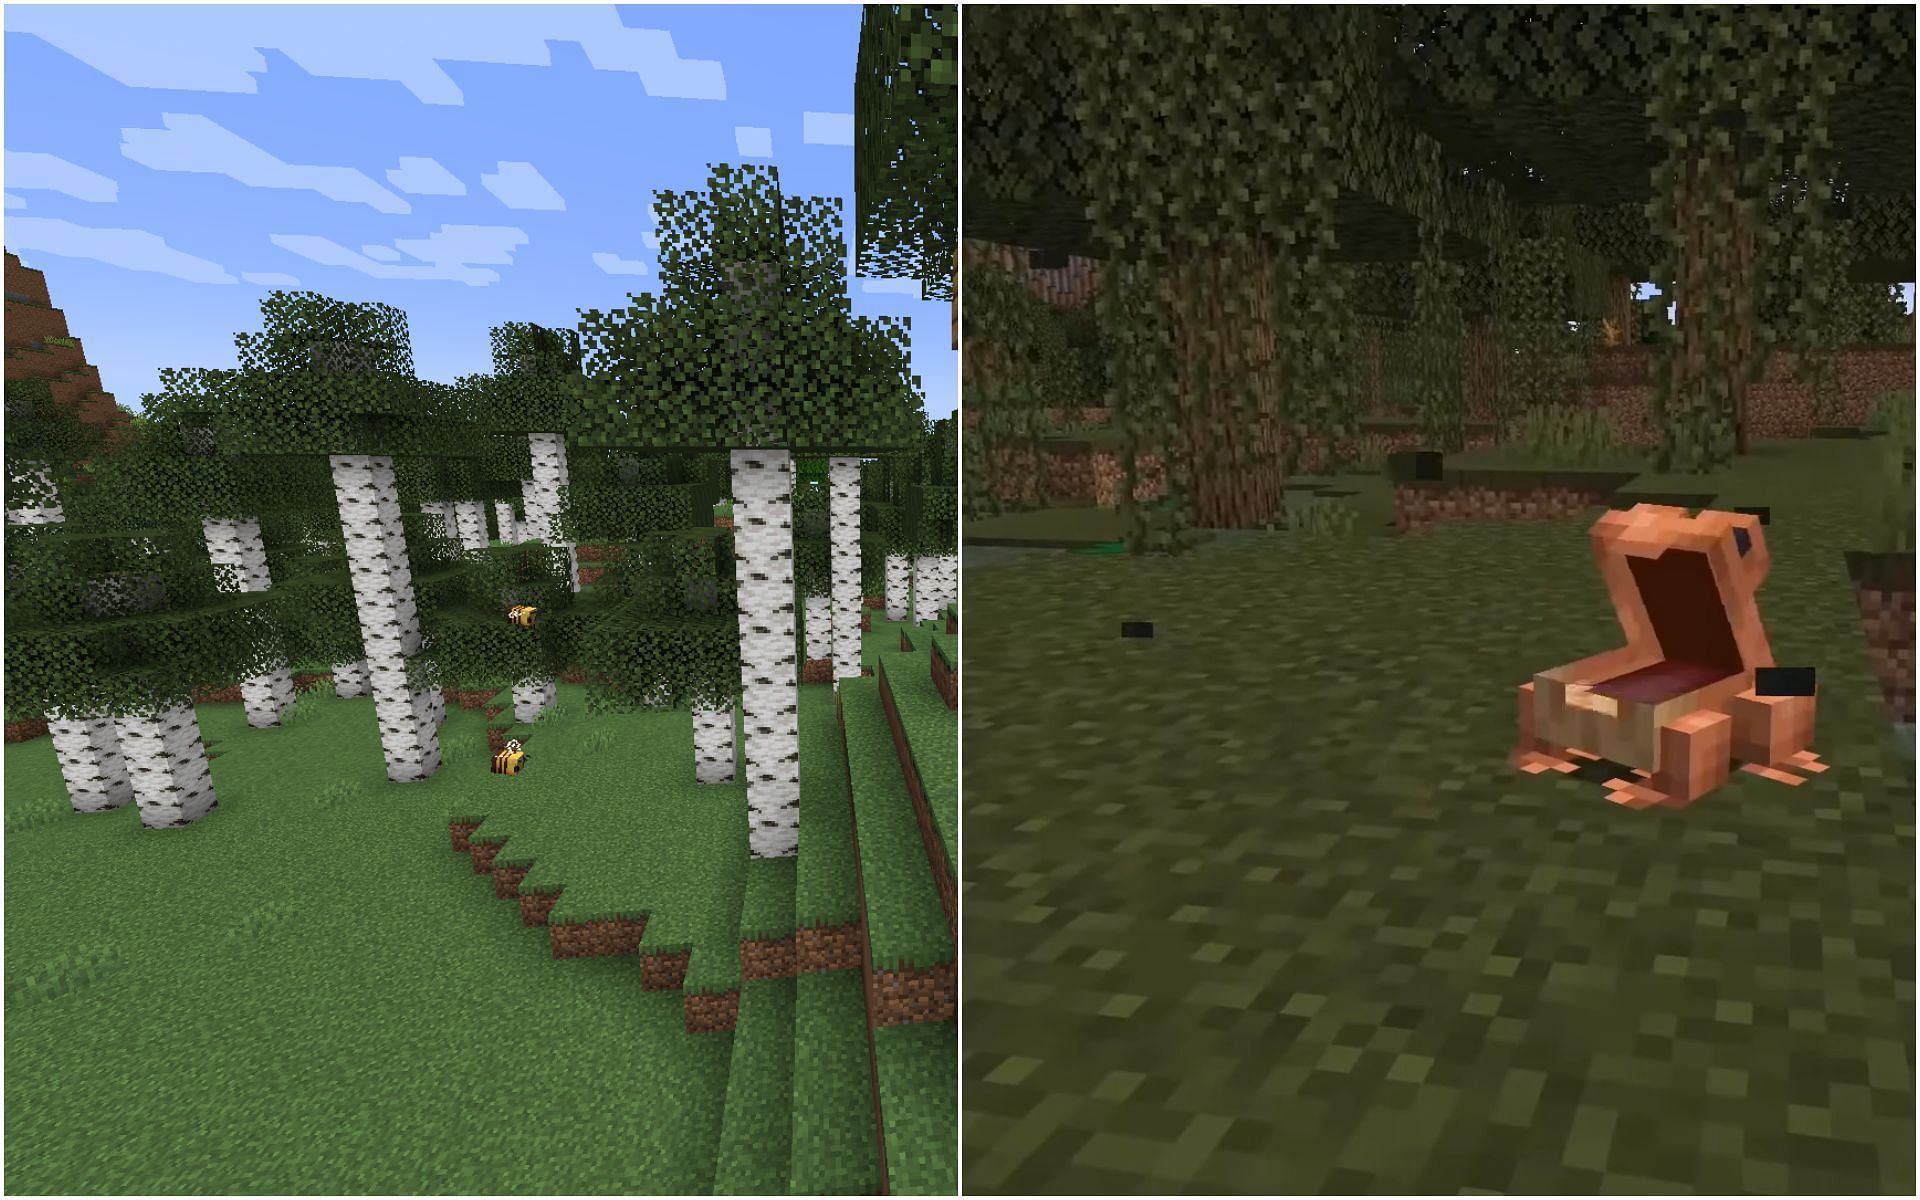 Birch forest and frogs eating fireflies (Image via Mojang)